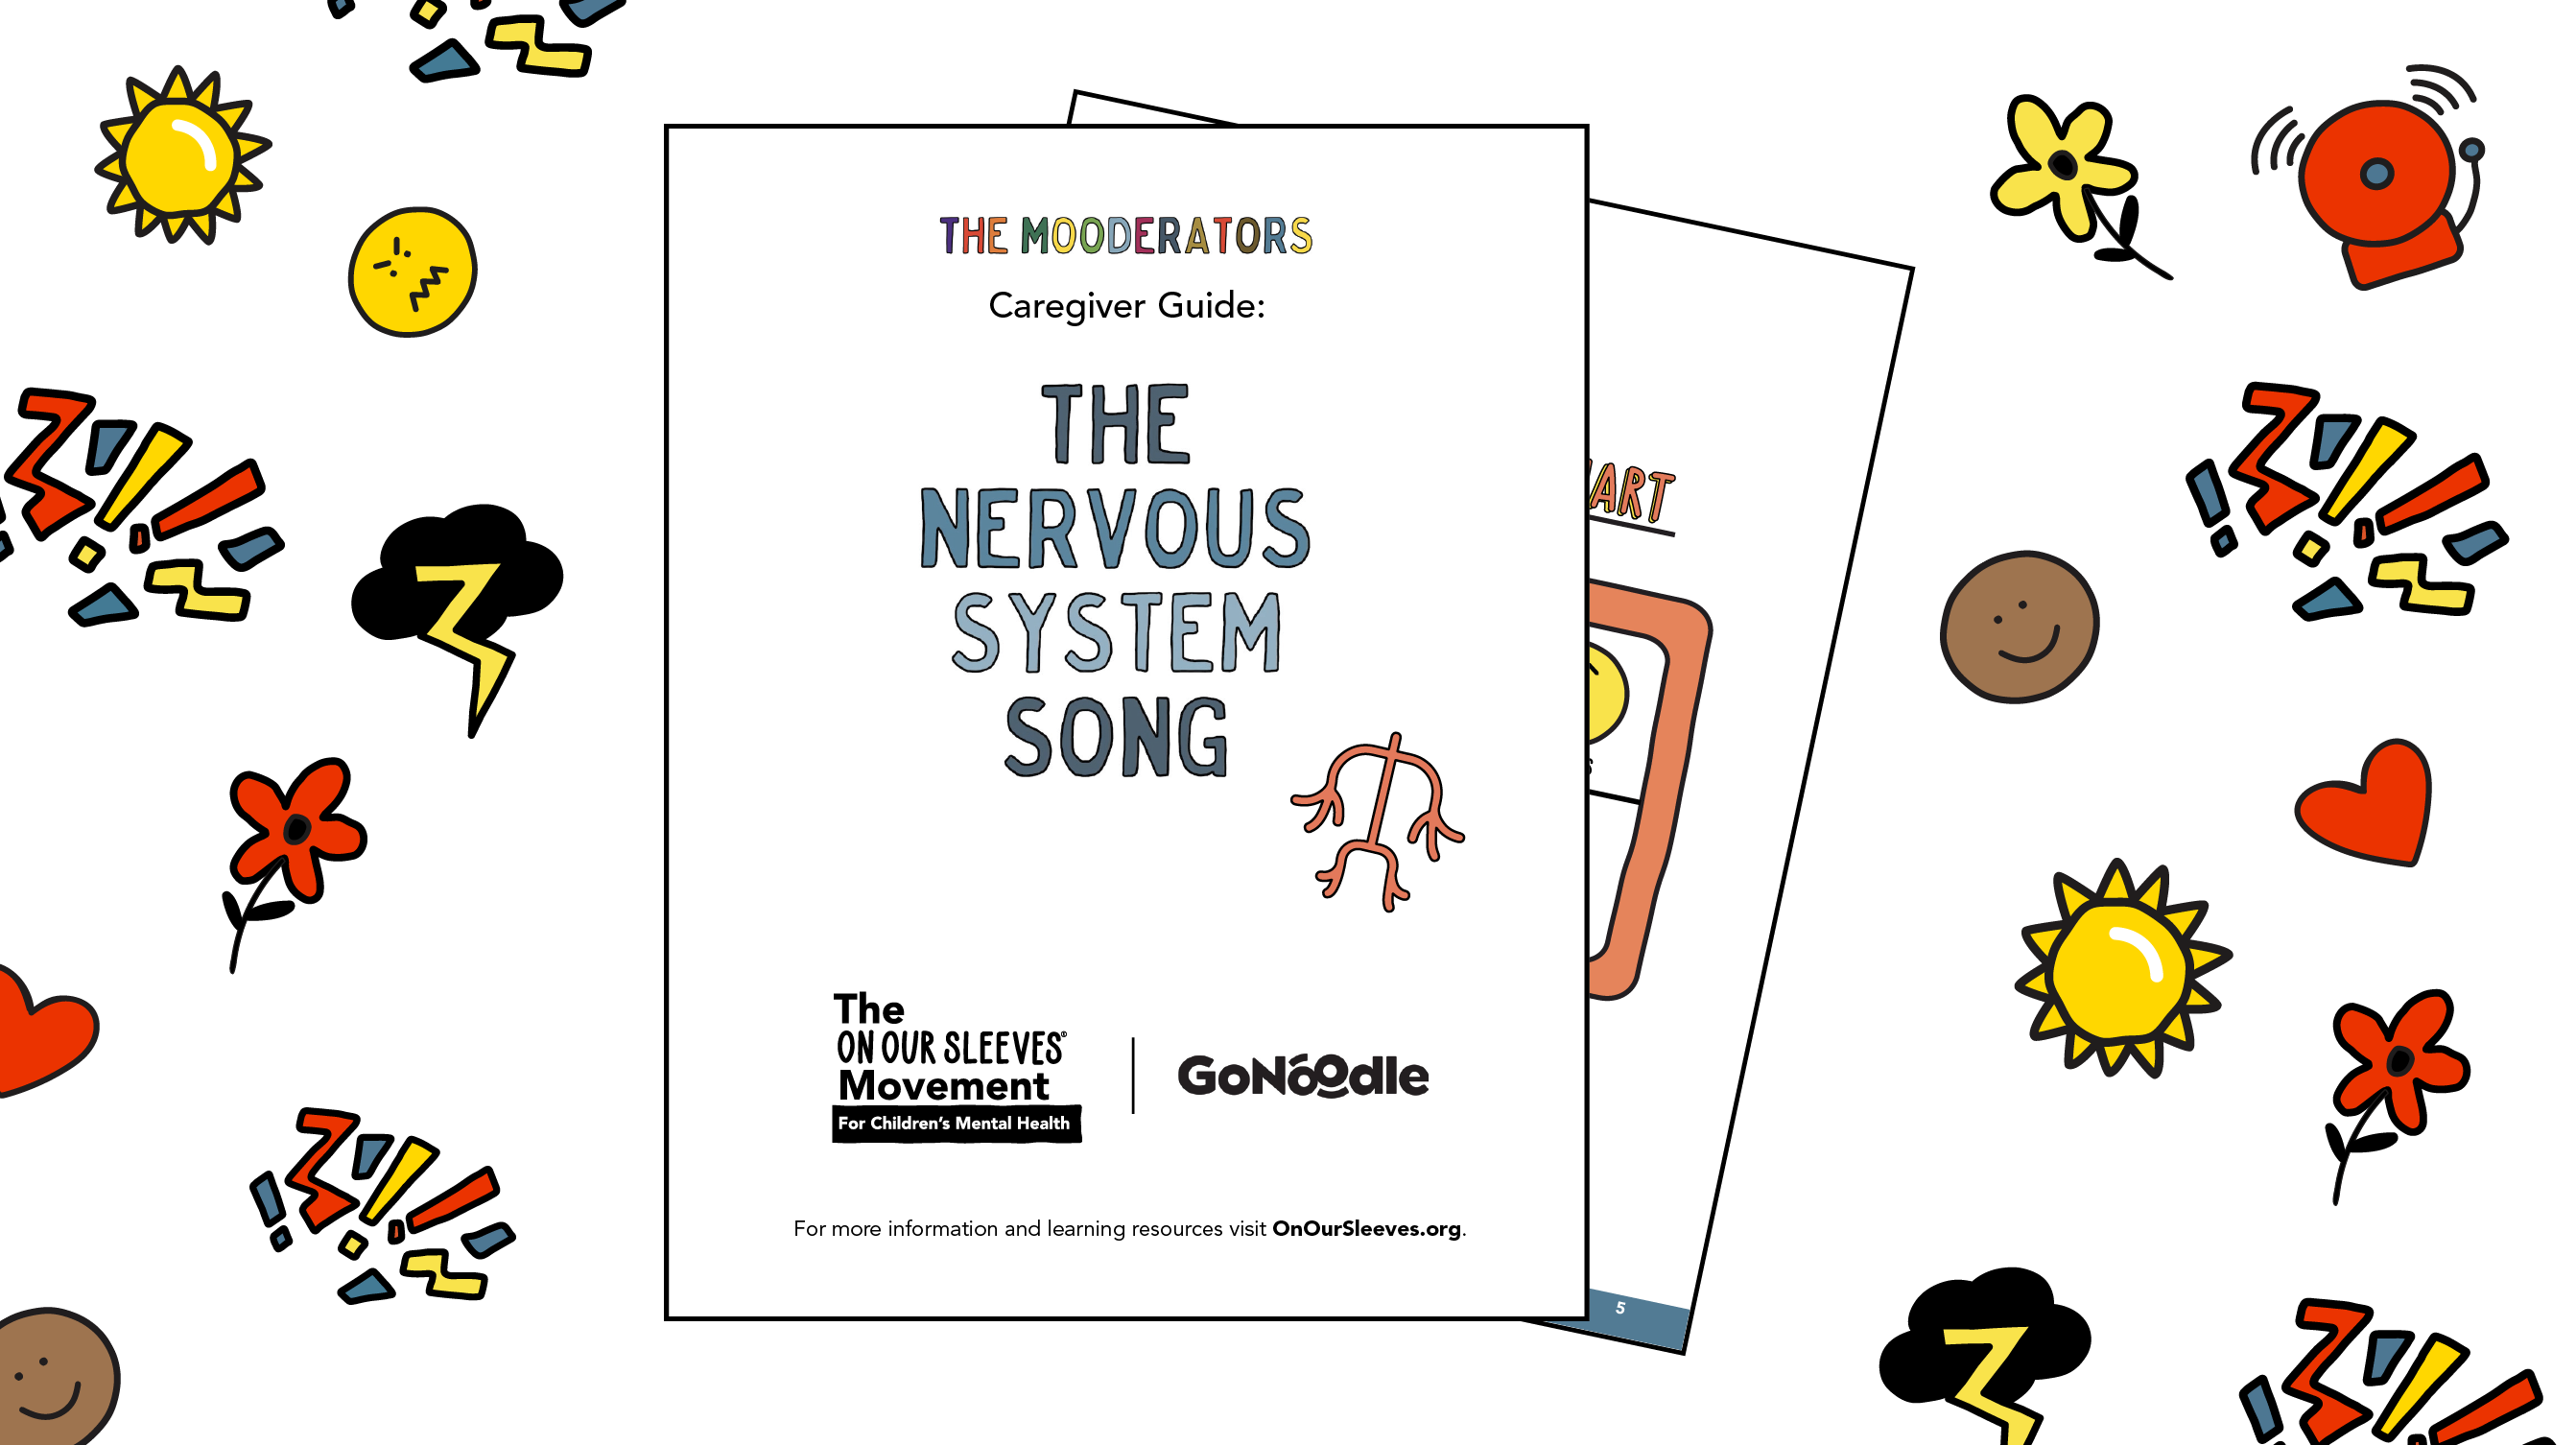 The Nervous System Song: Caregiver Guide